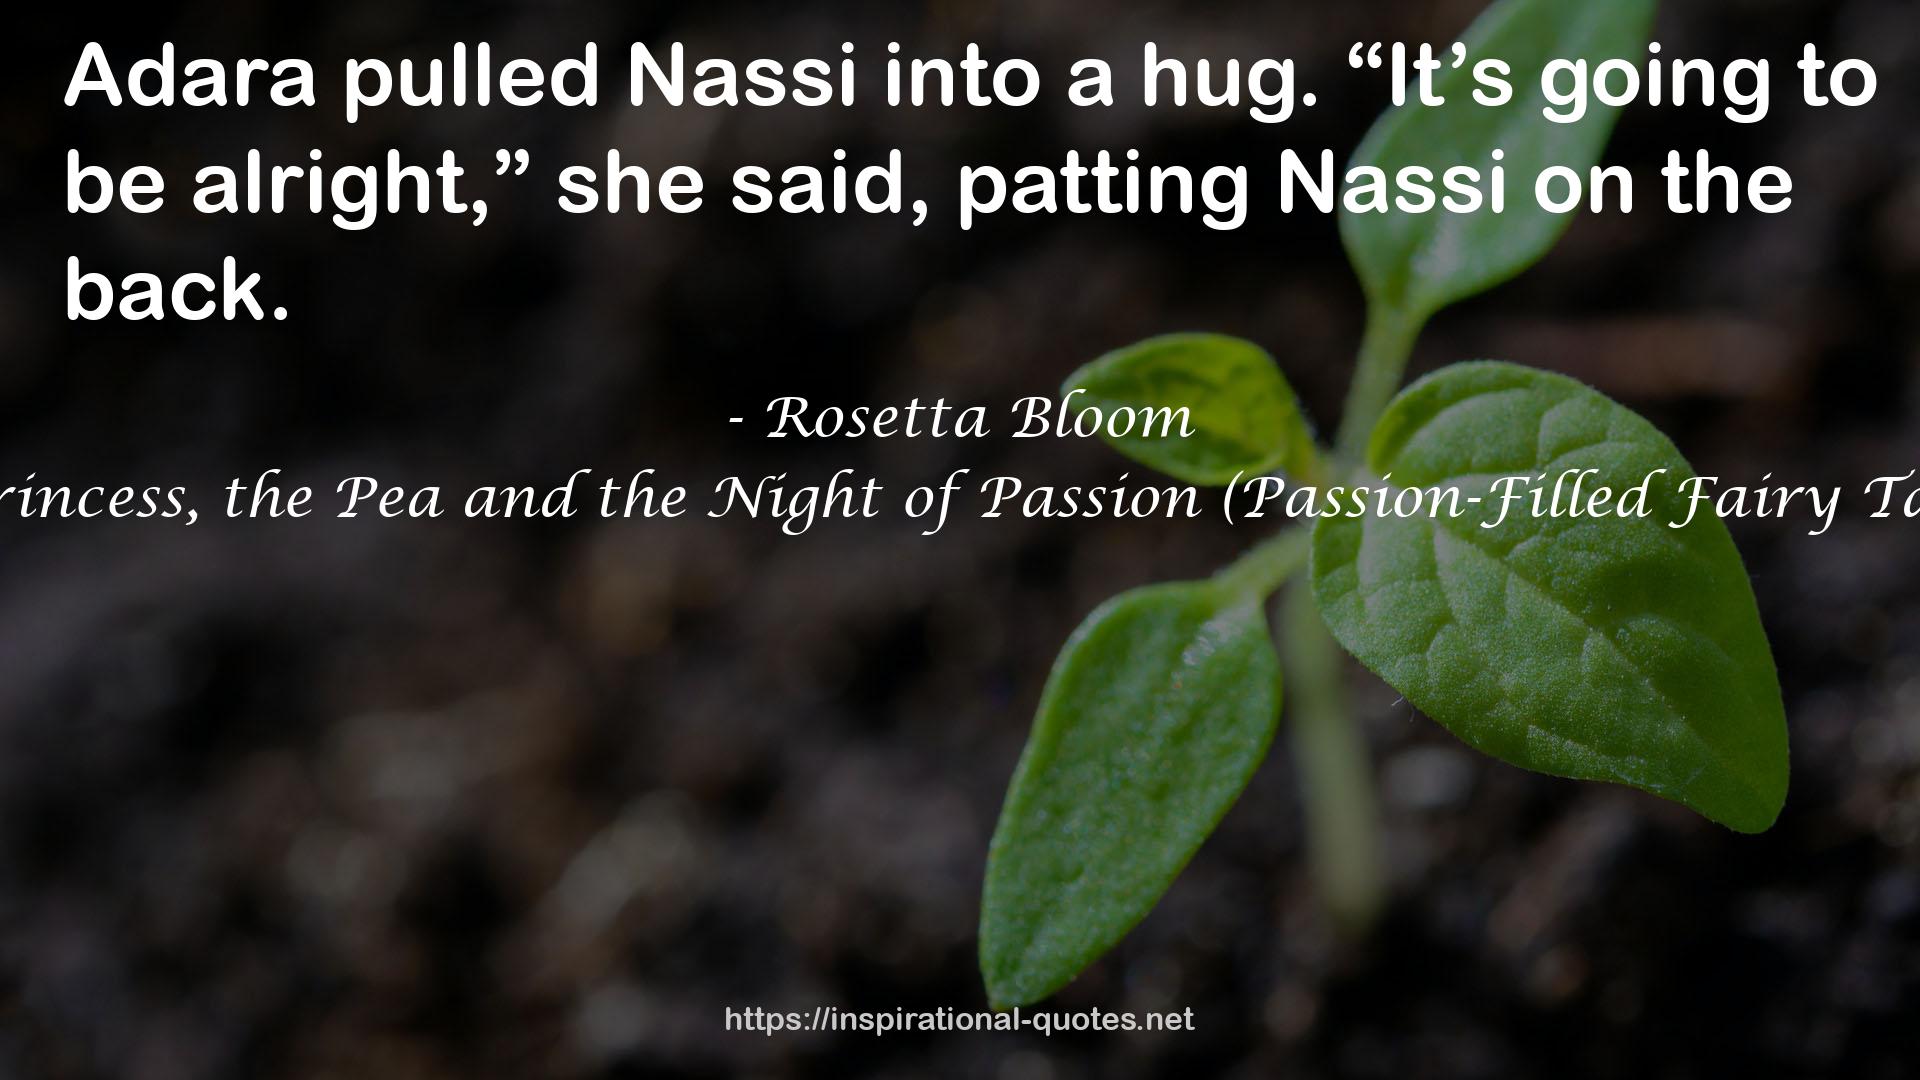 The Princess, the Pea and the Night of Passion (Passion-Filled Fairy Tales #1) QUOTES